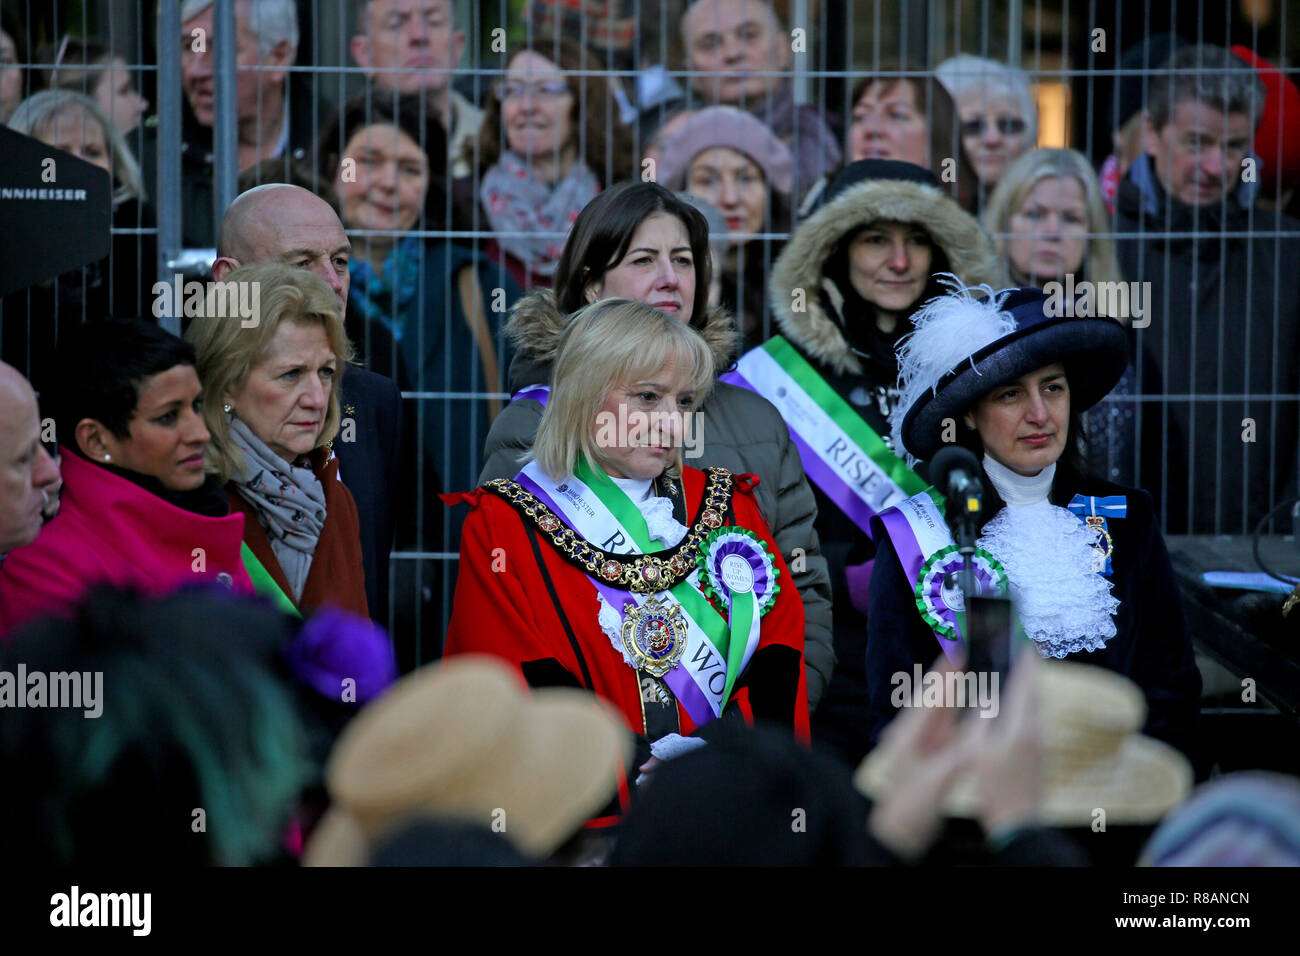 Manchester, UK. 14th Dec 2018. The Lord Mayor attends the unveiling of a statue of Suffragette Emmeline Pankhurst by sculpture designer Hazel Reeves. The day marks 100 years since Women won the vote.Manchester, UK, 14th December 2018 Credit: Barbara Cook/Alamy Live News Stock Photo